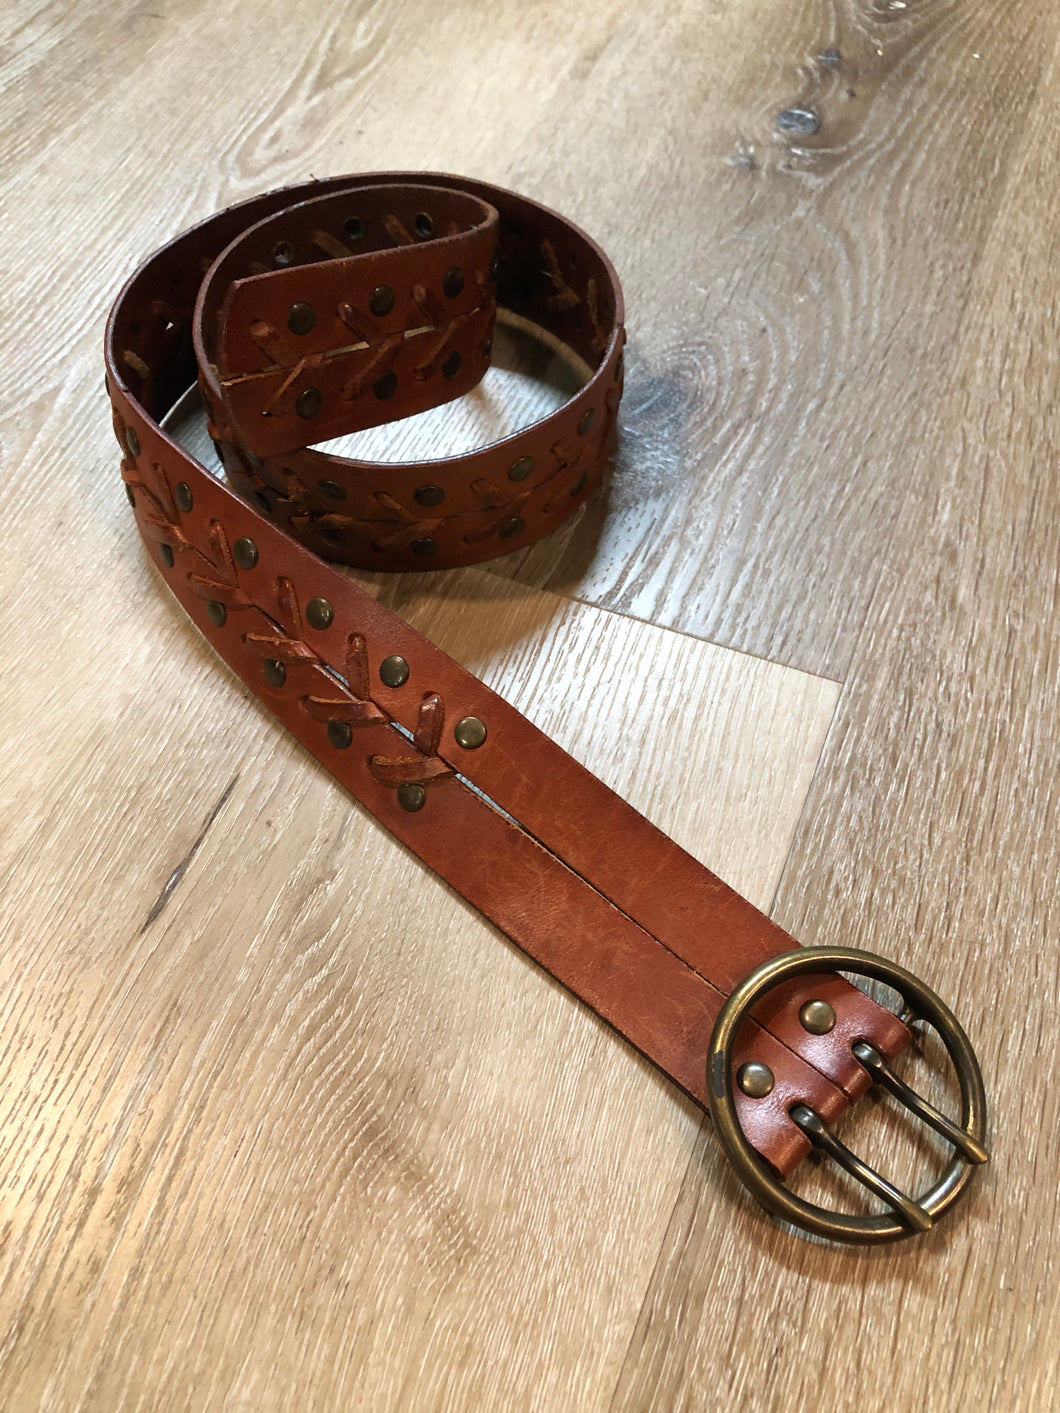 Kingspier Vintage - Brown leather belt with decorative leather stitching and brass circle buckle.
